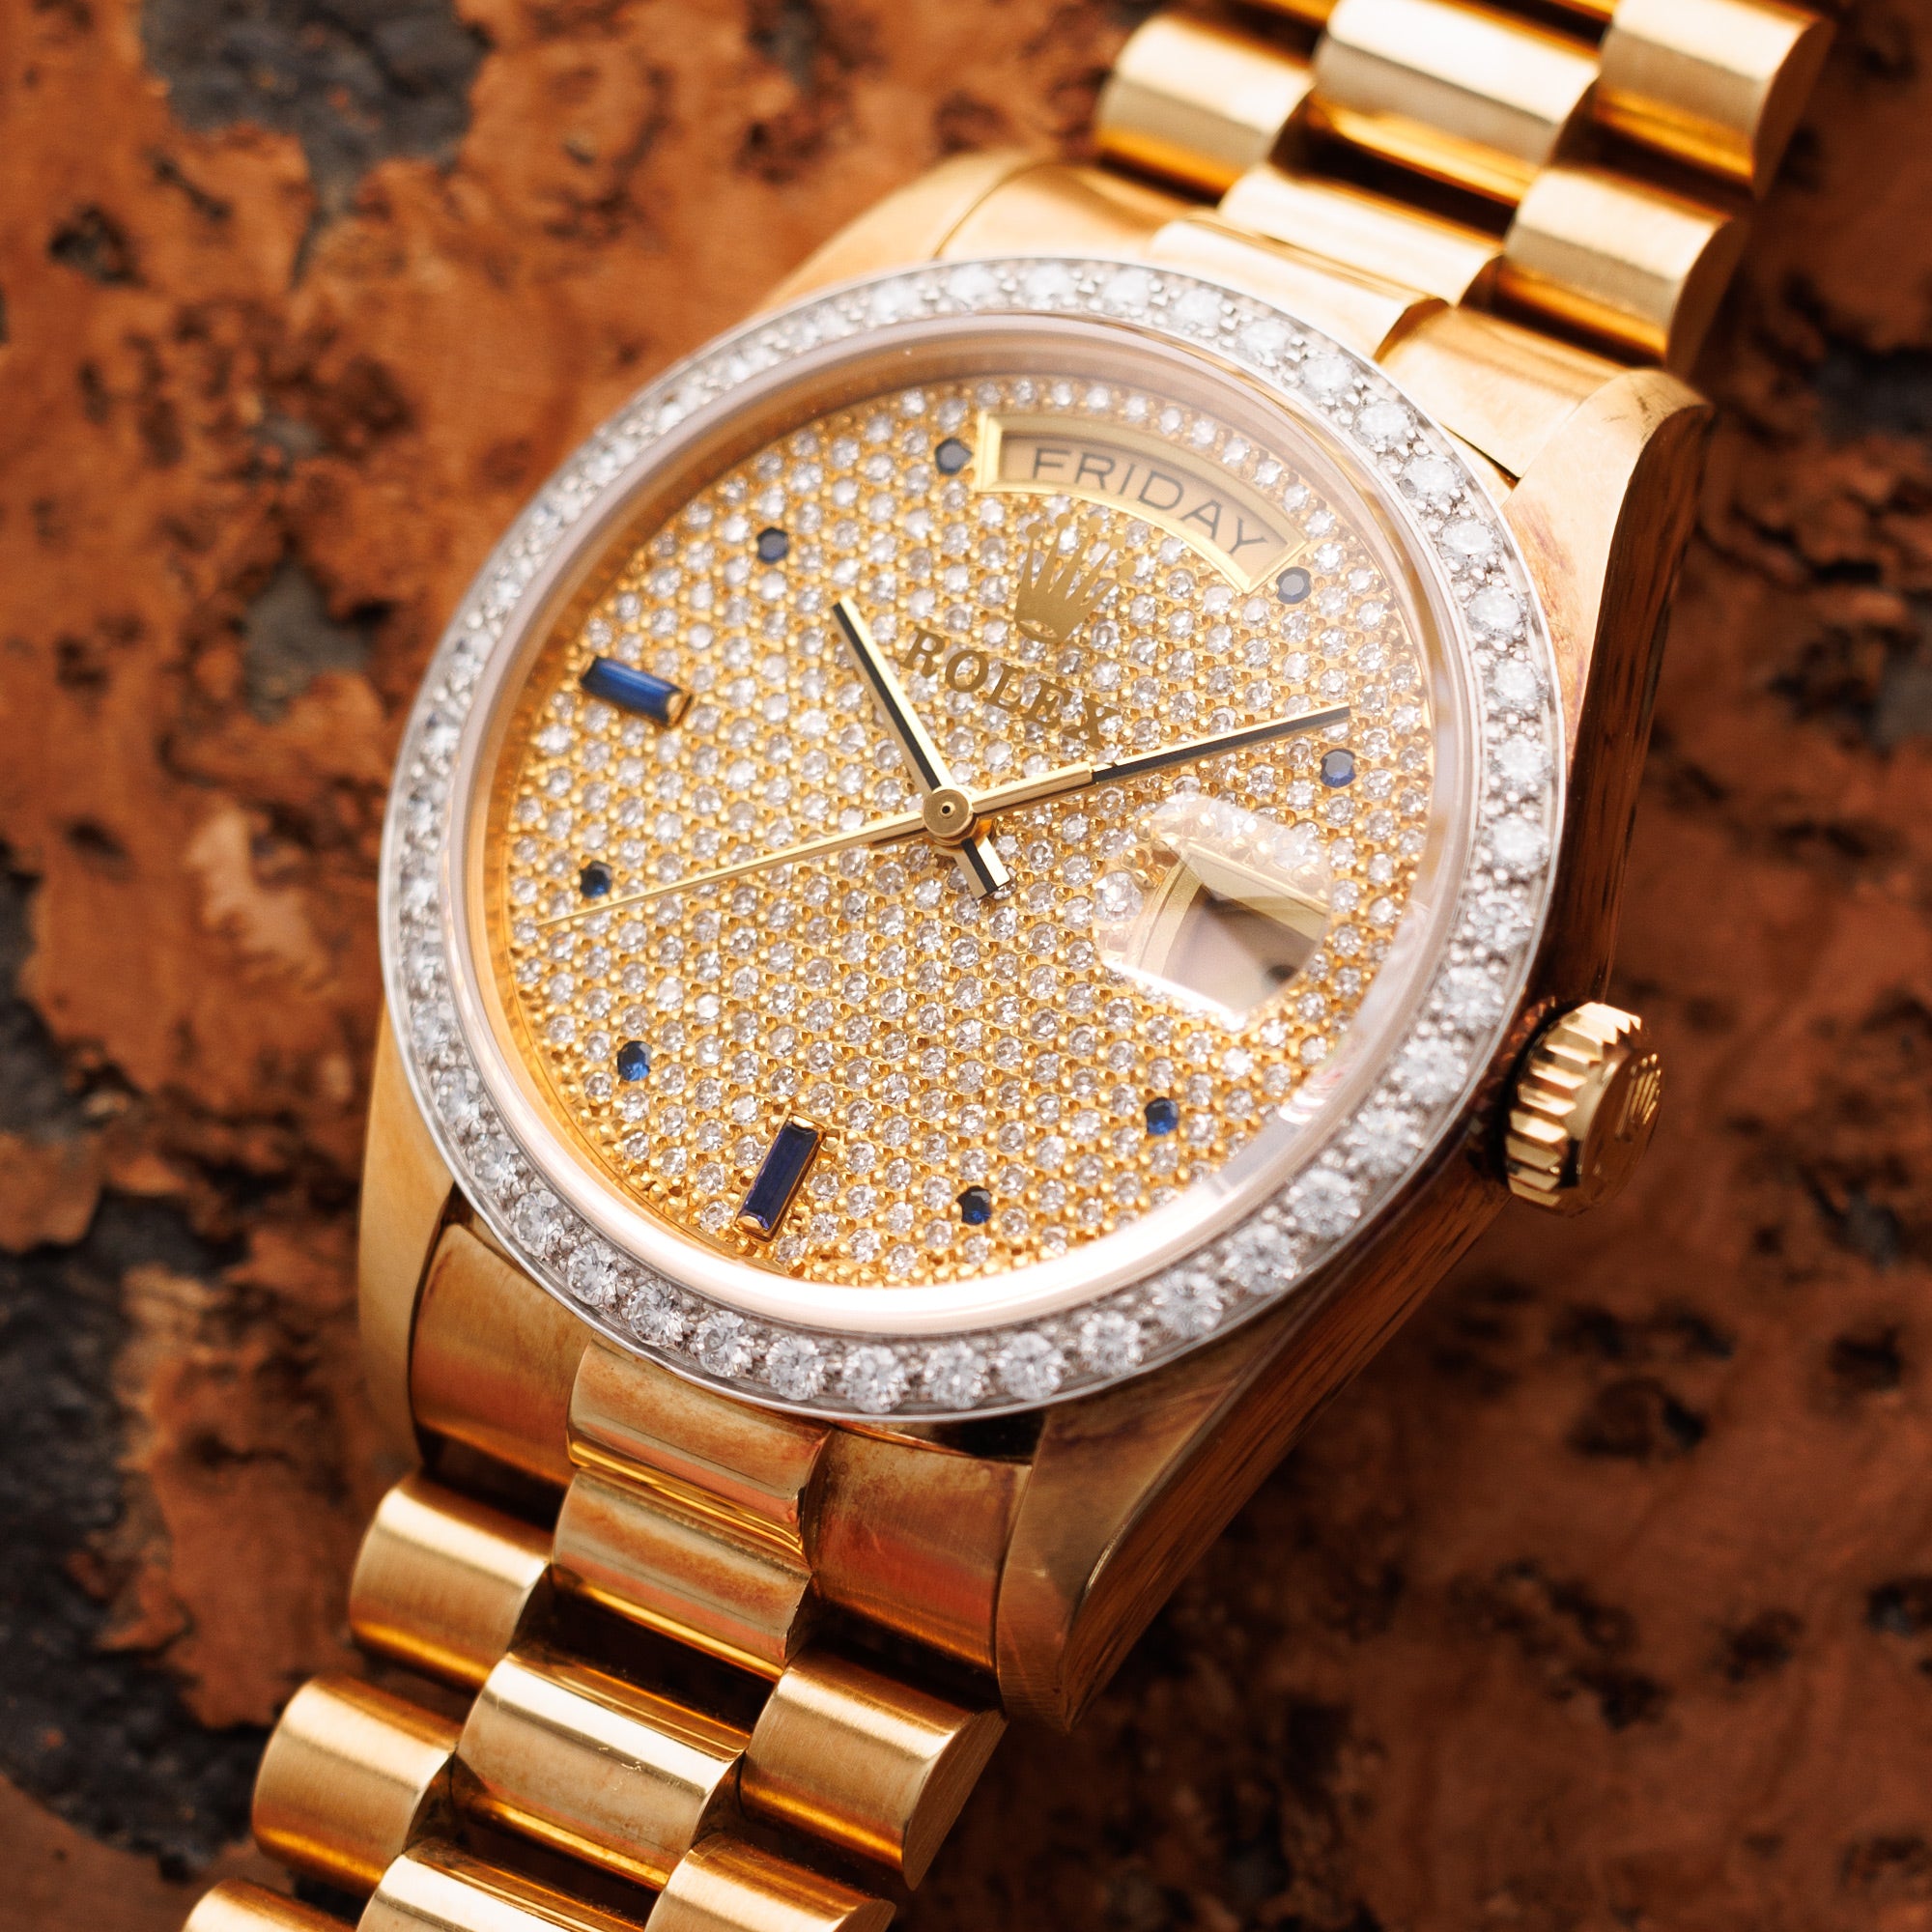 Rolex - Rolex Yellow Gold Day-Date Watch Ref. 18048 with Pave Diamond and Sapphire Dial - The Keystone Watches